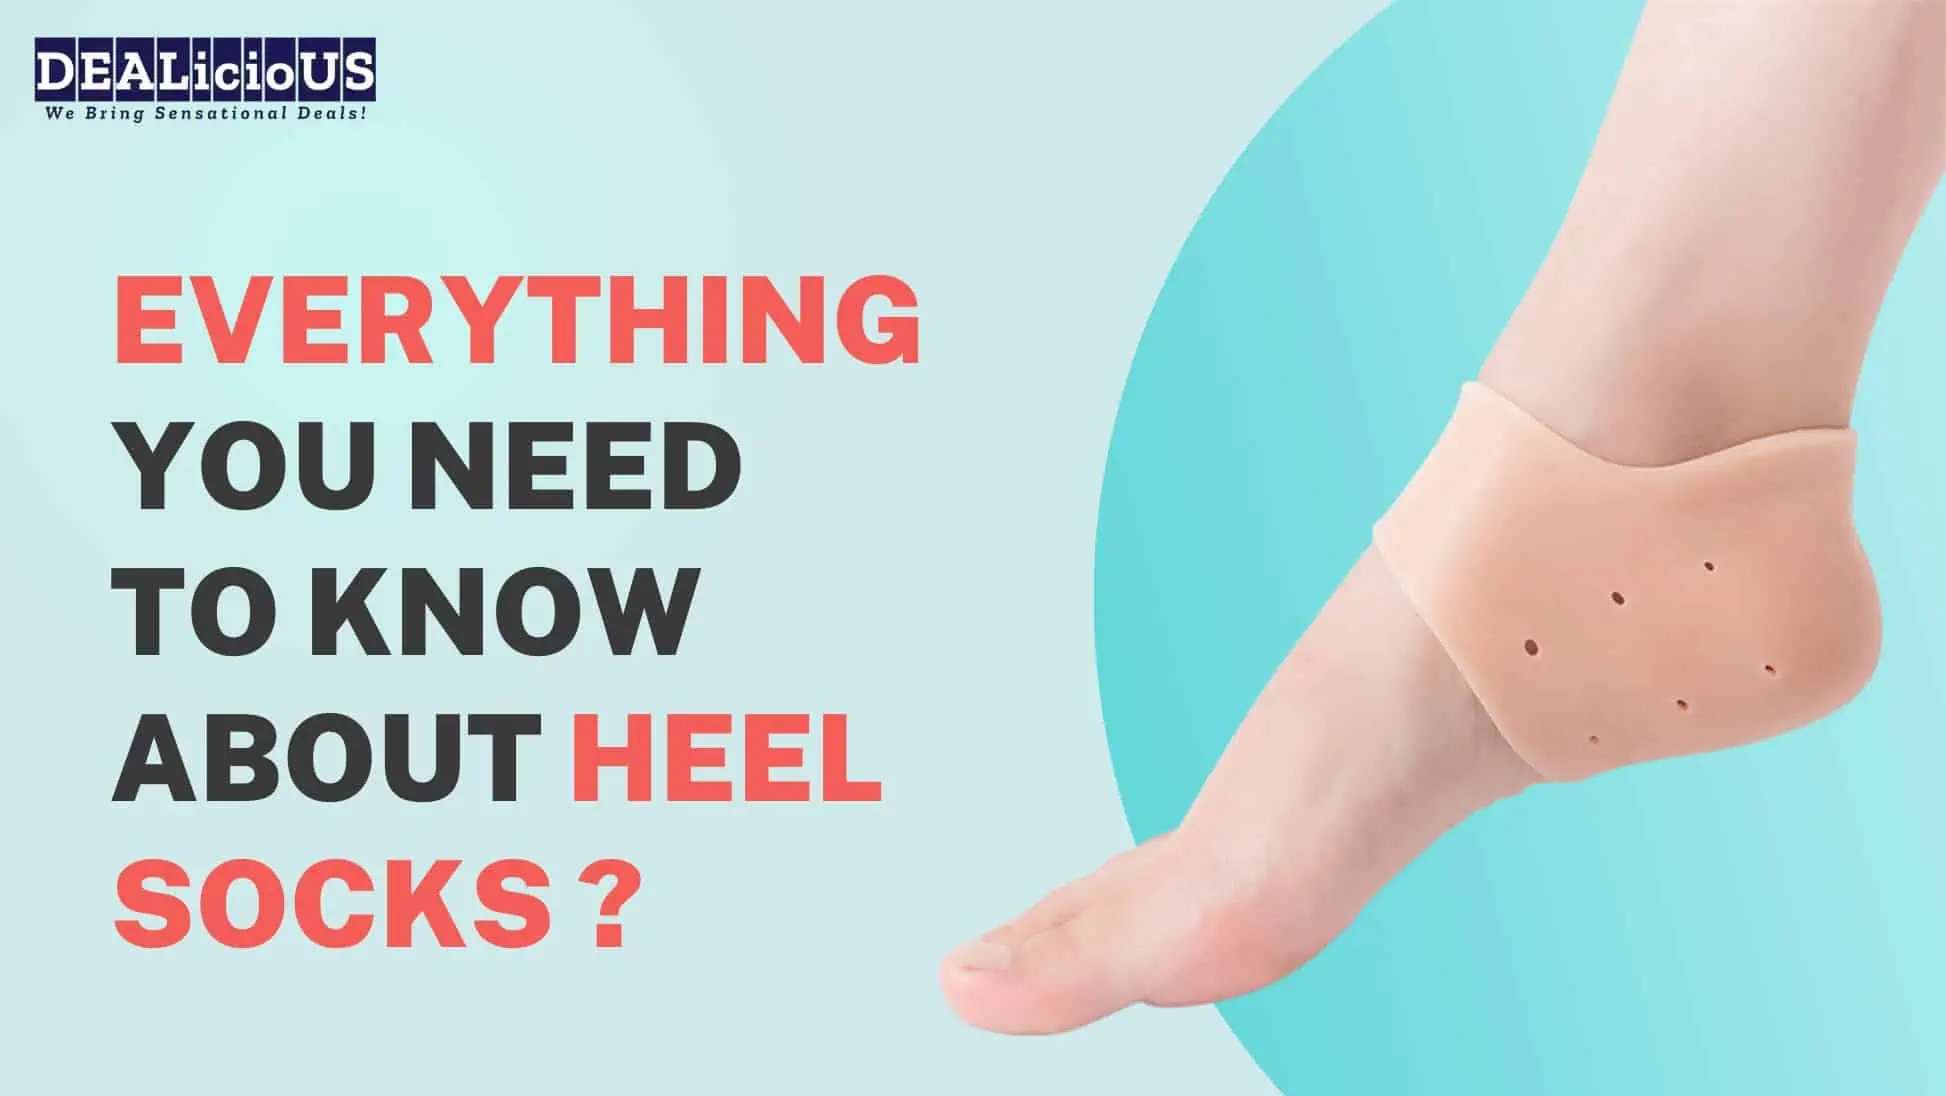 Everything you need to know about heel socks